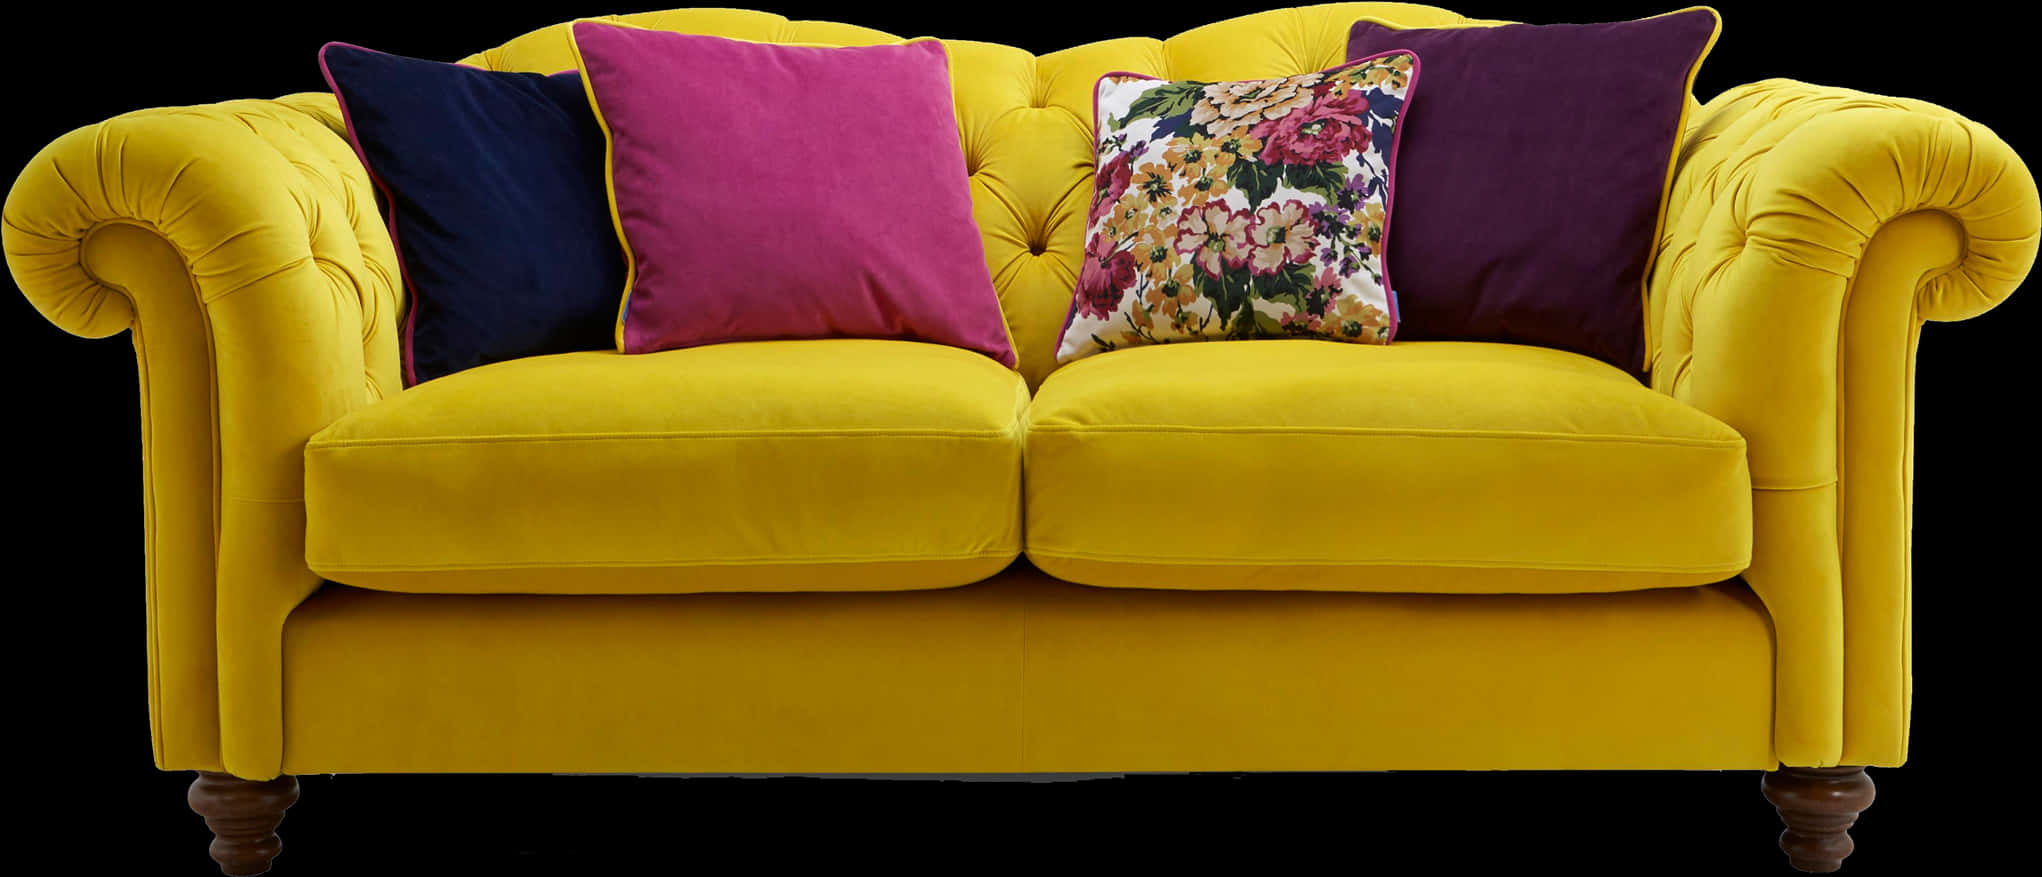 Vibrant Yellow Chesterfield Sofawith Cushions.jpg PNG image